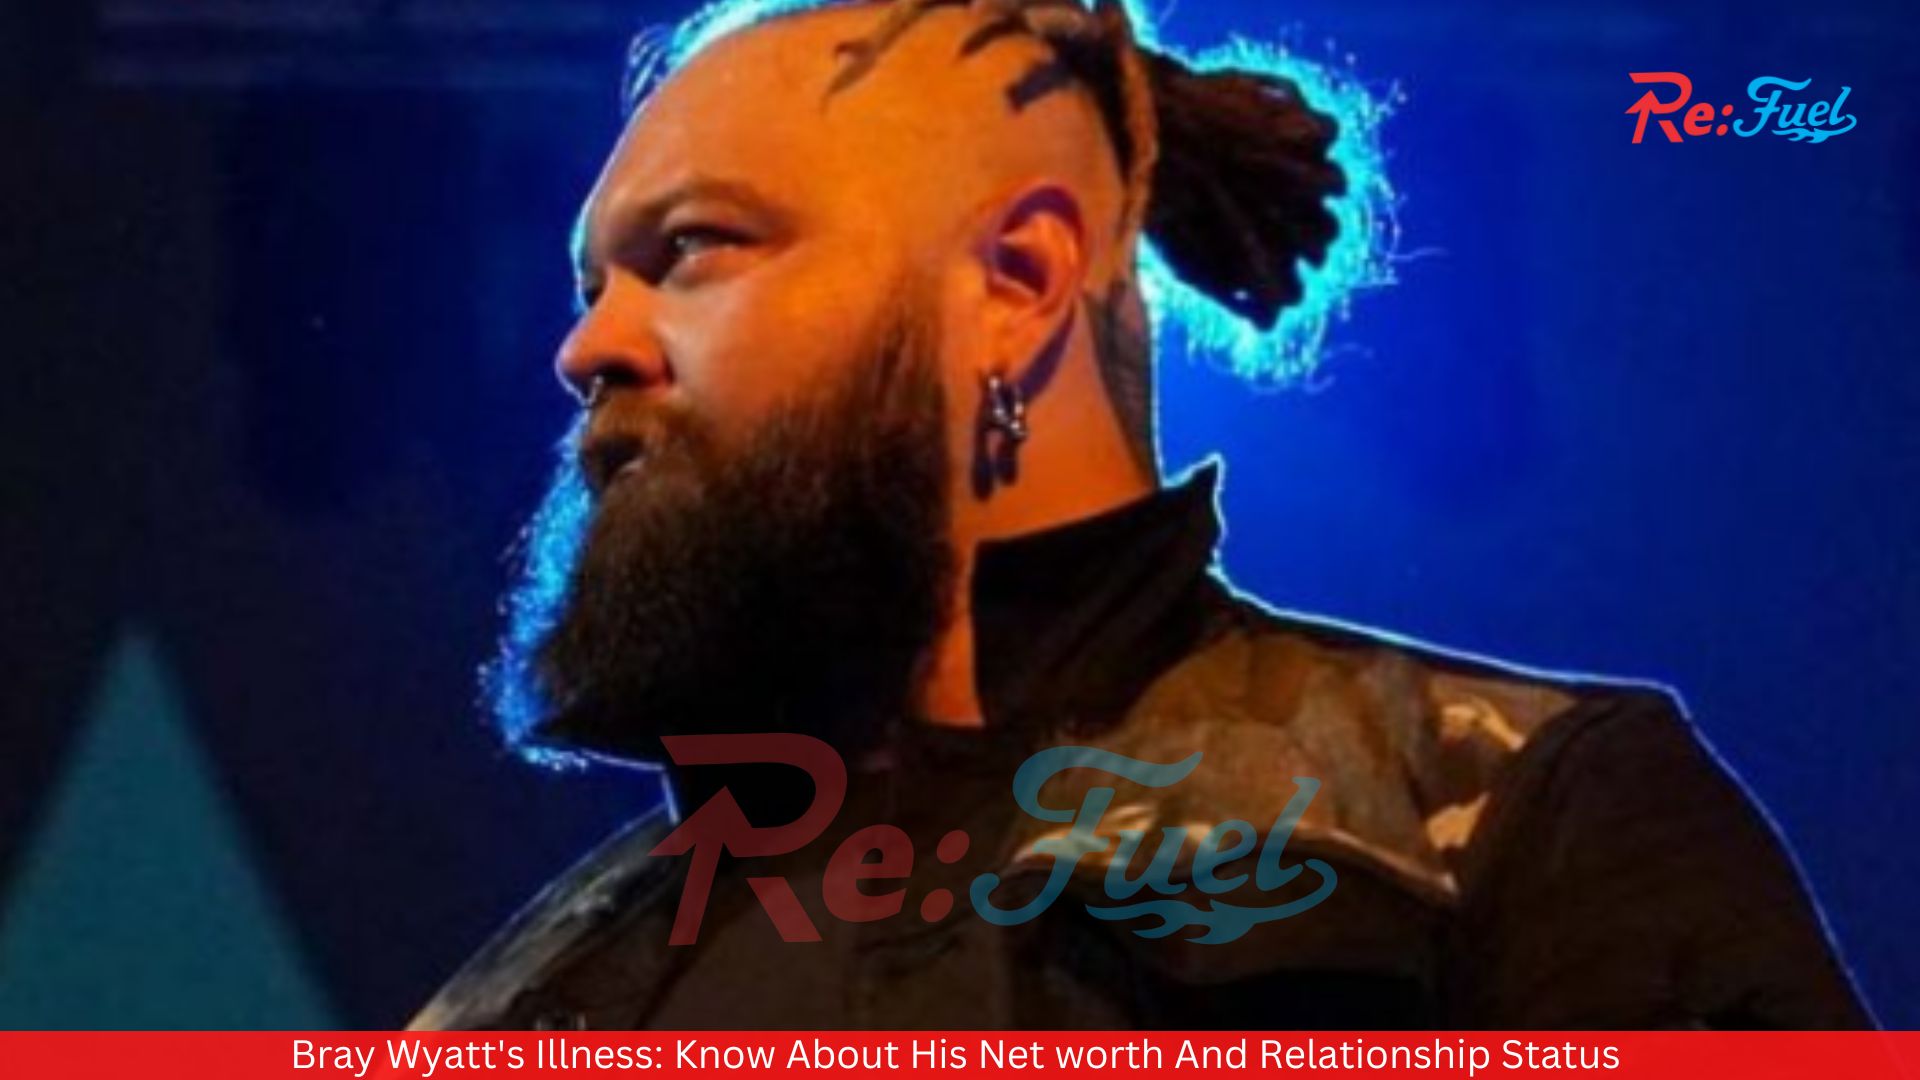 Bray Wyatt's Illness: Know About His Net worth And Relationship Status